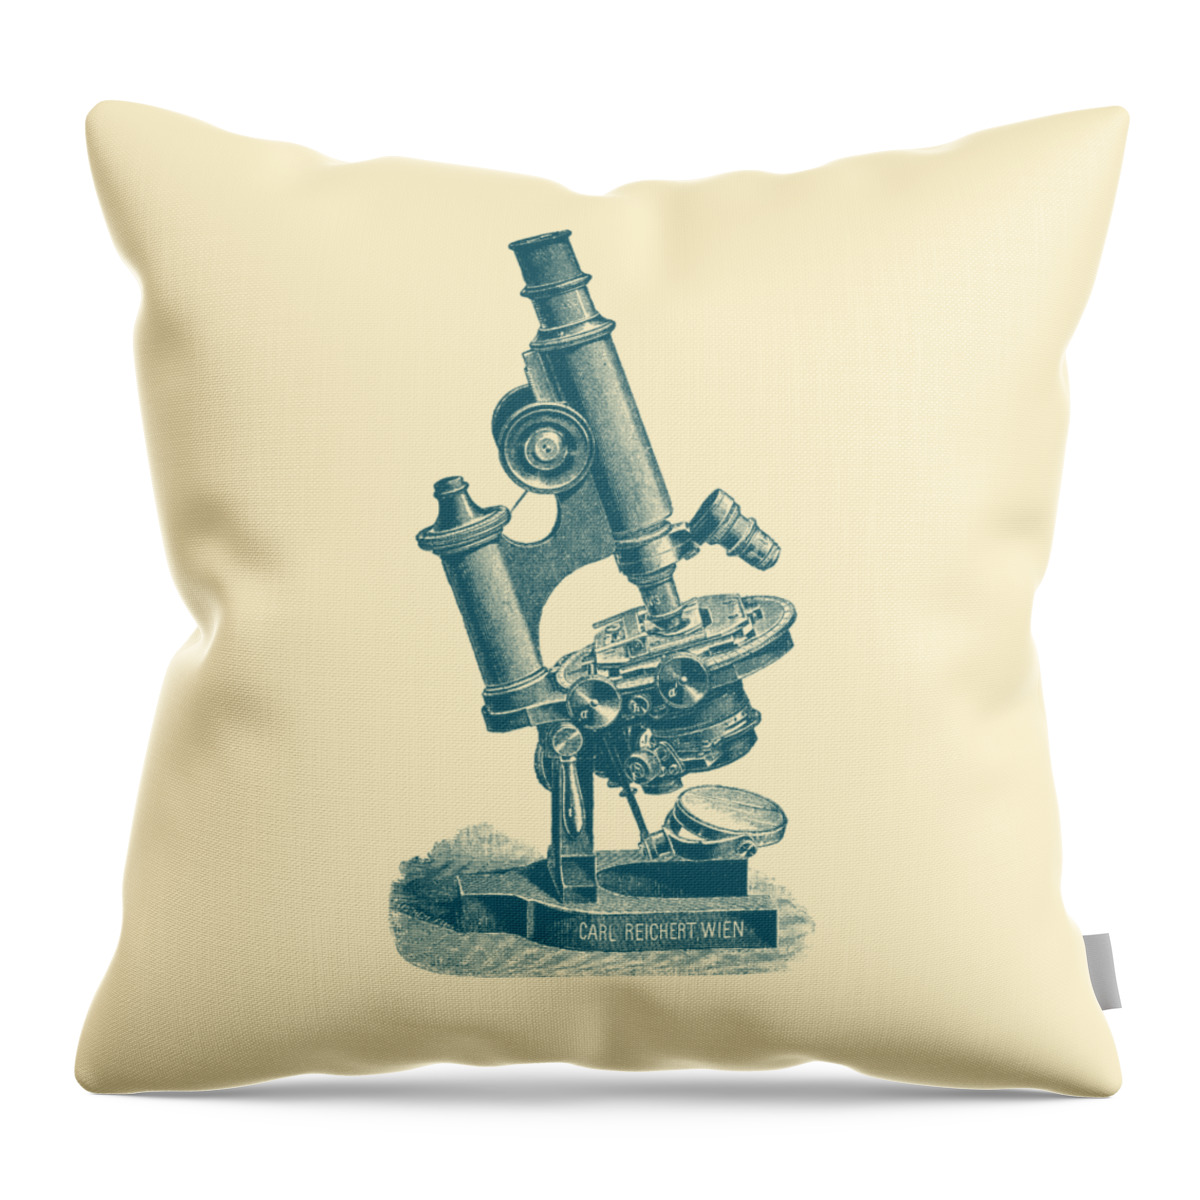 Microscope Throw Pillow featuring the digital art Geeky Microscope In Blue And Cream by Madame Memento